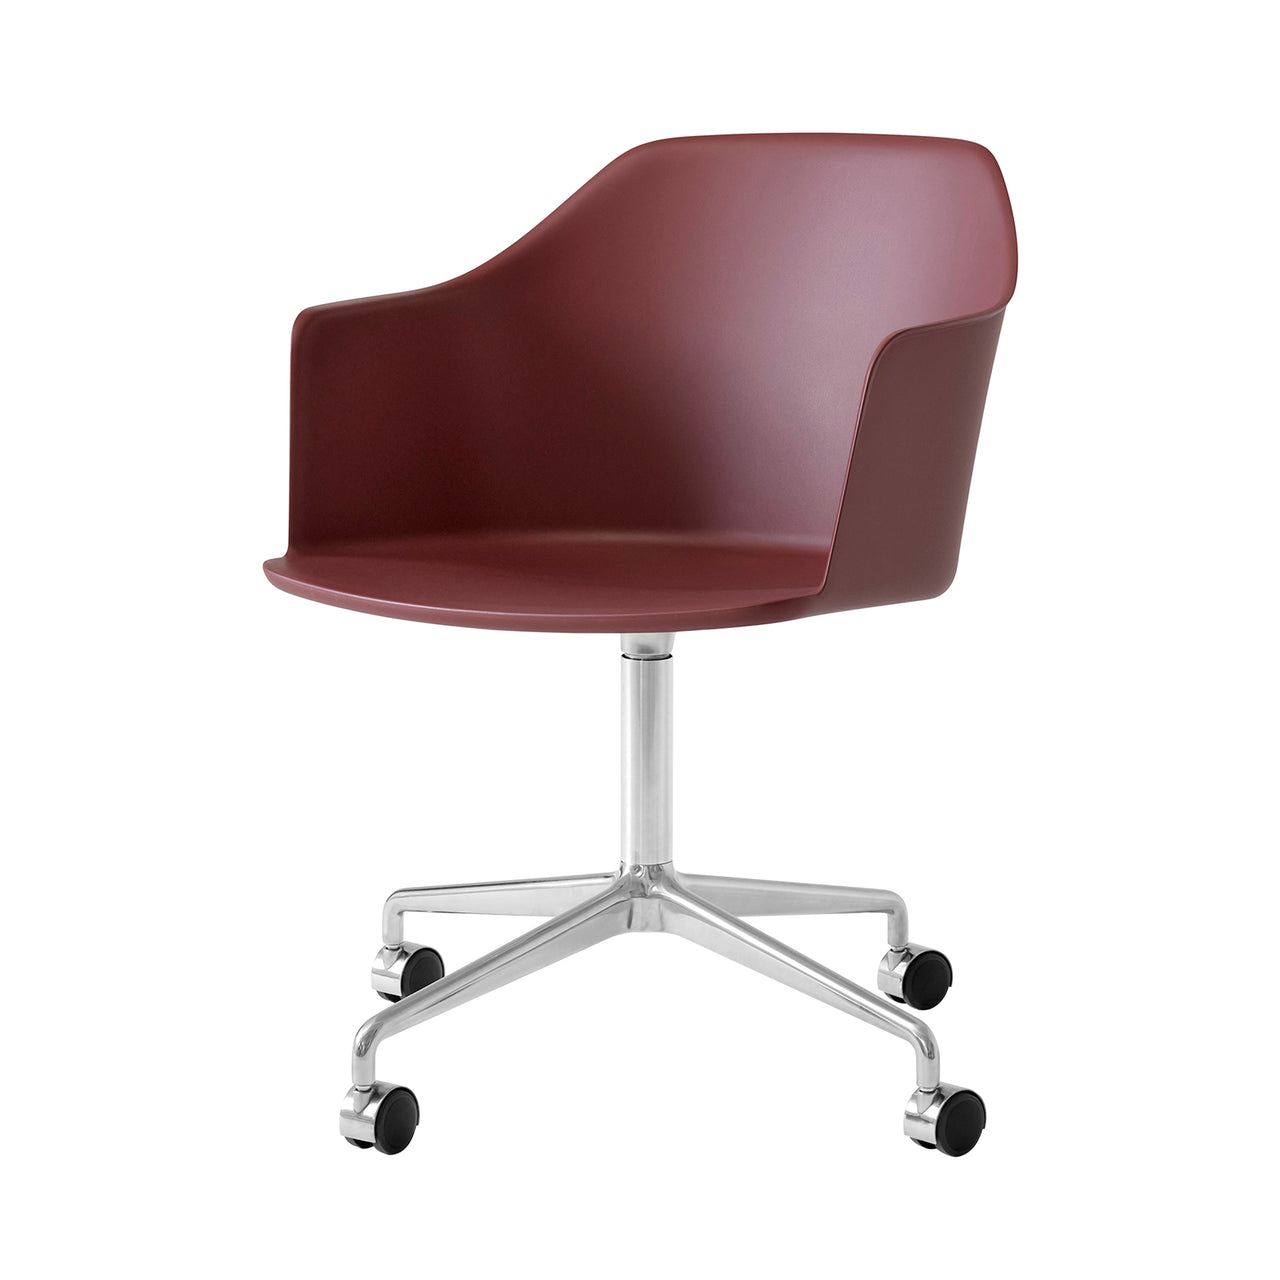 Rely Chair HW48: Red Brown + Polished Aluminum